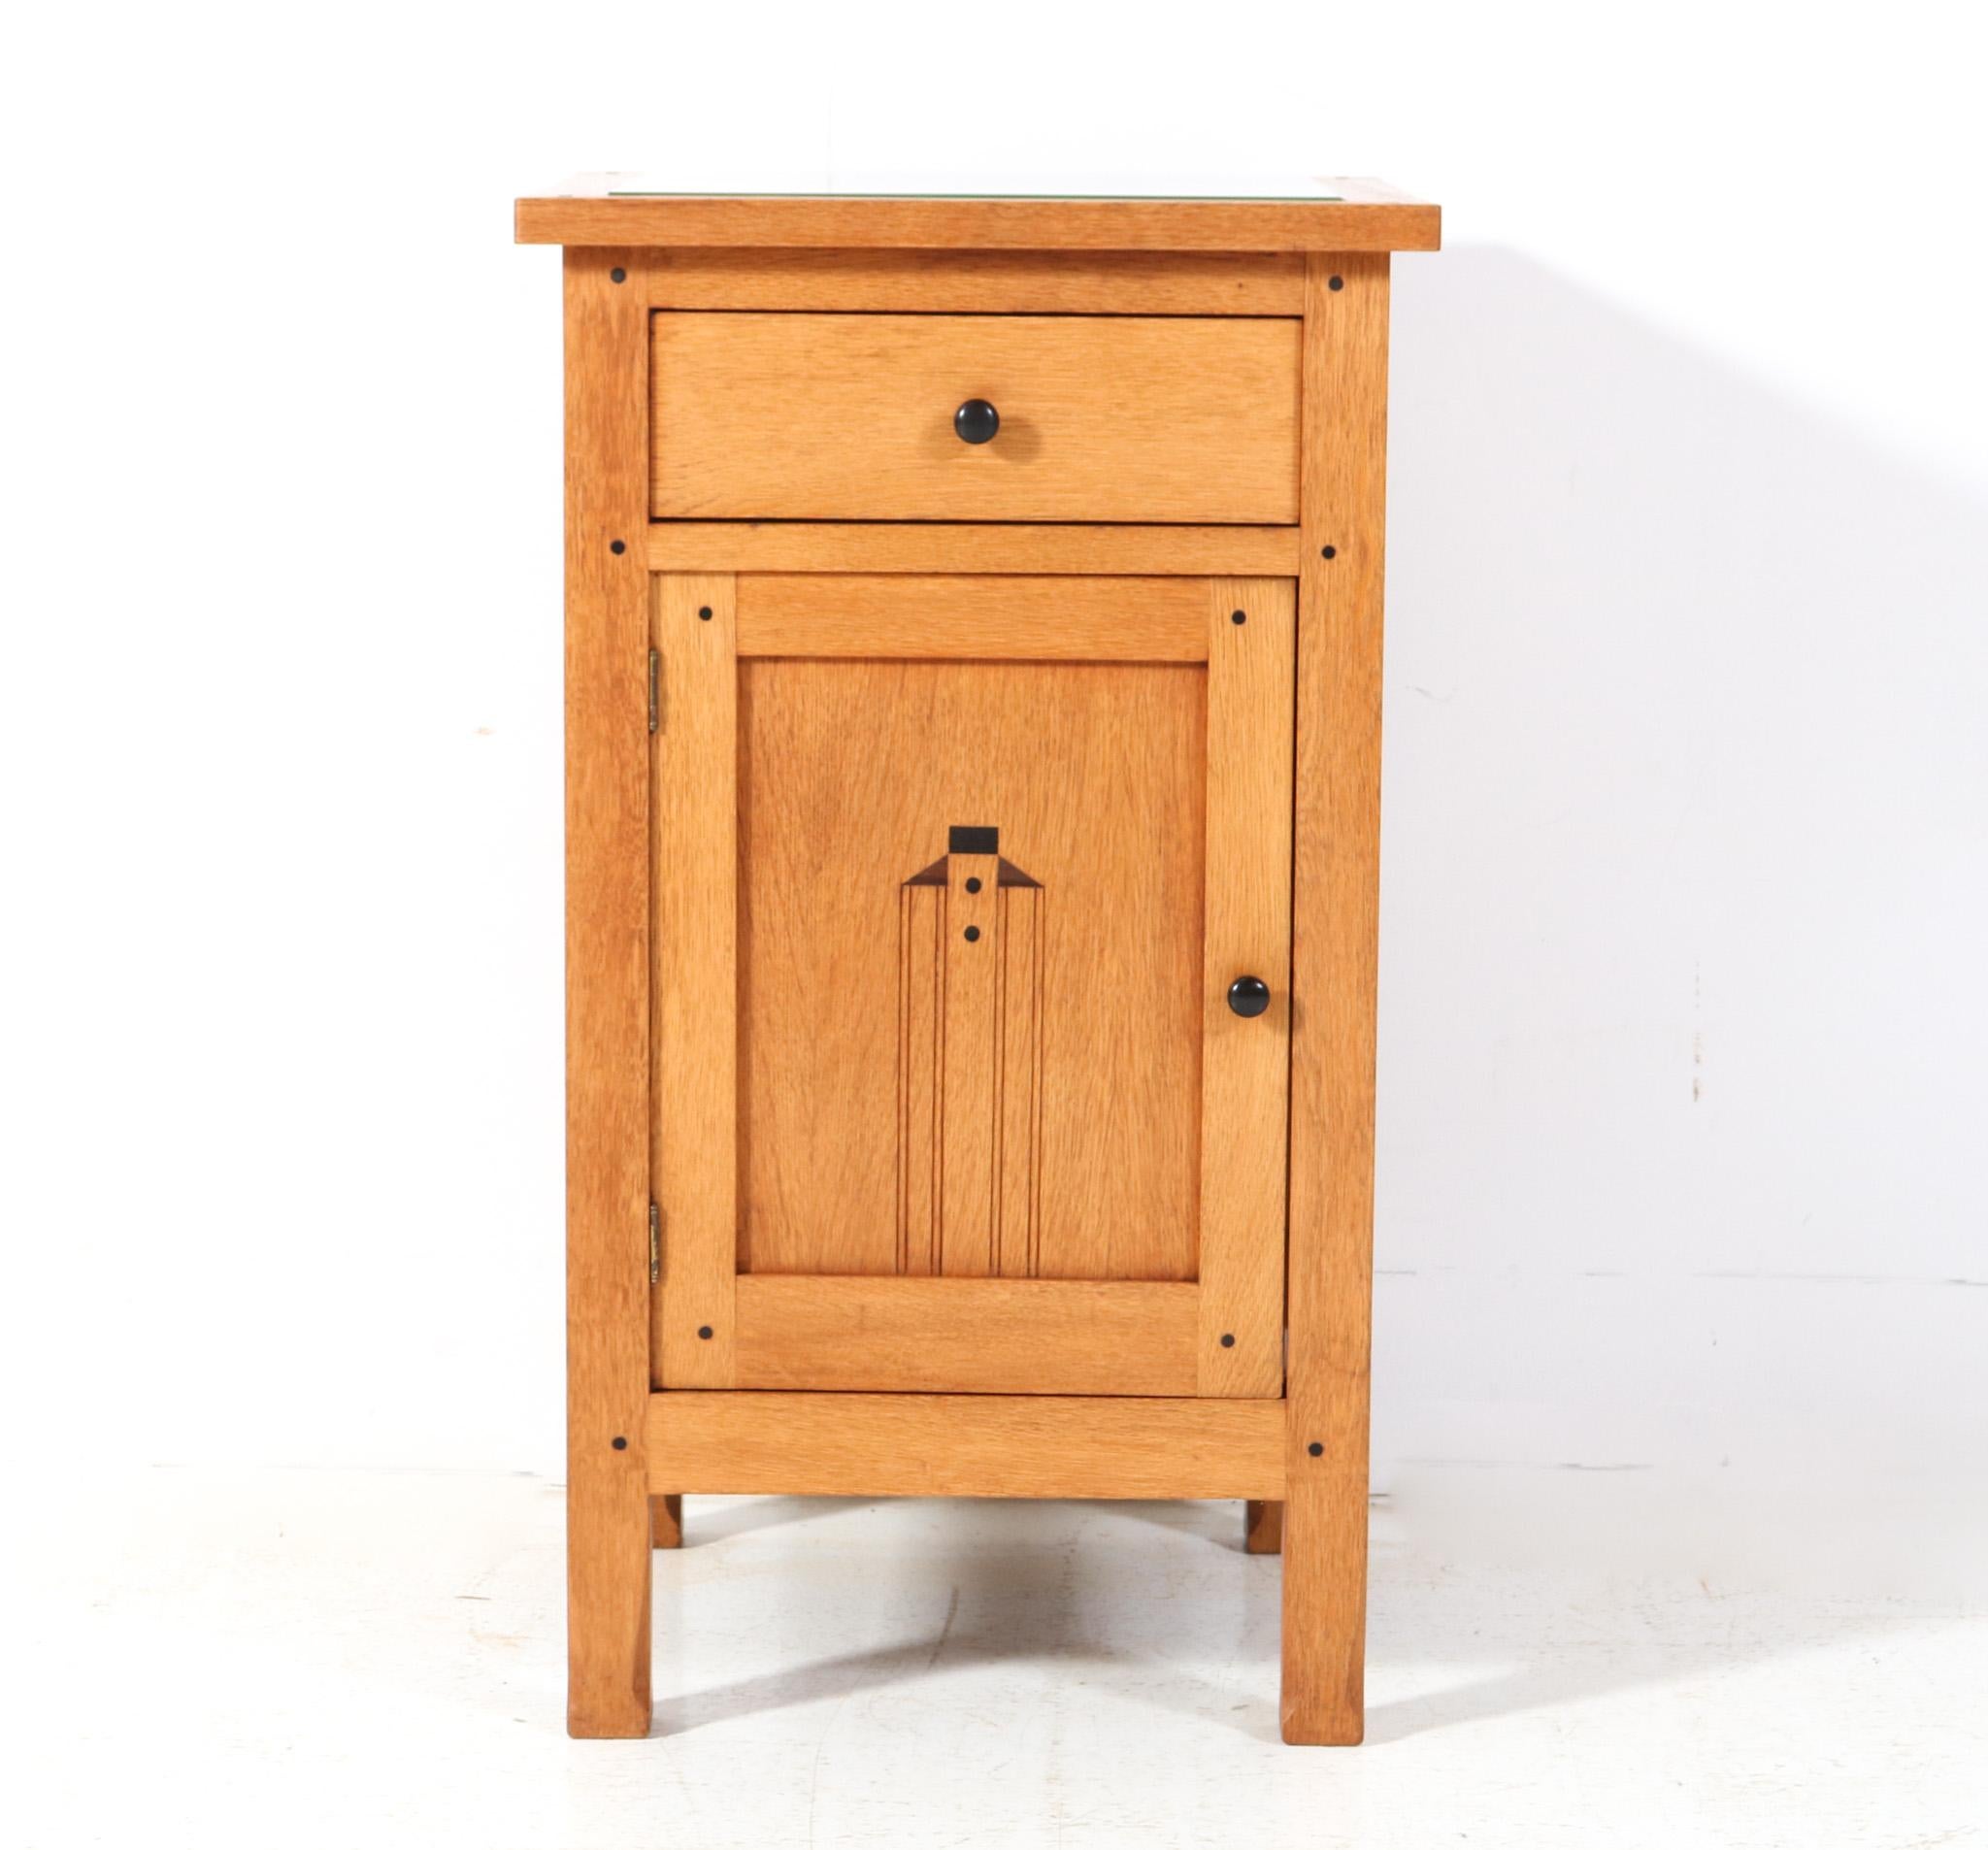 Magnificent and ultra rare Arts & Crafts Art Nouveau nightstand or bedside table.
Design by Jac. van den Bosch.
Striking Dutch design from the 1900s.
Solid oak base with original solid ebony knobs on door and drawer.
This wonderful Arts & Crafts Art